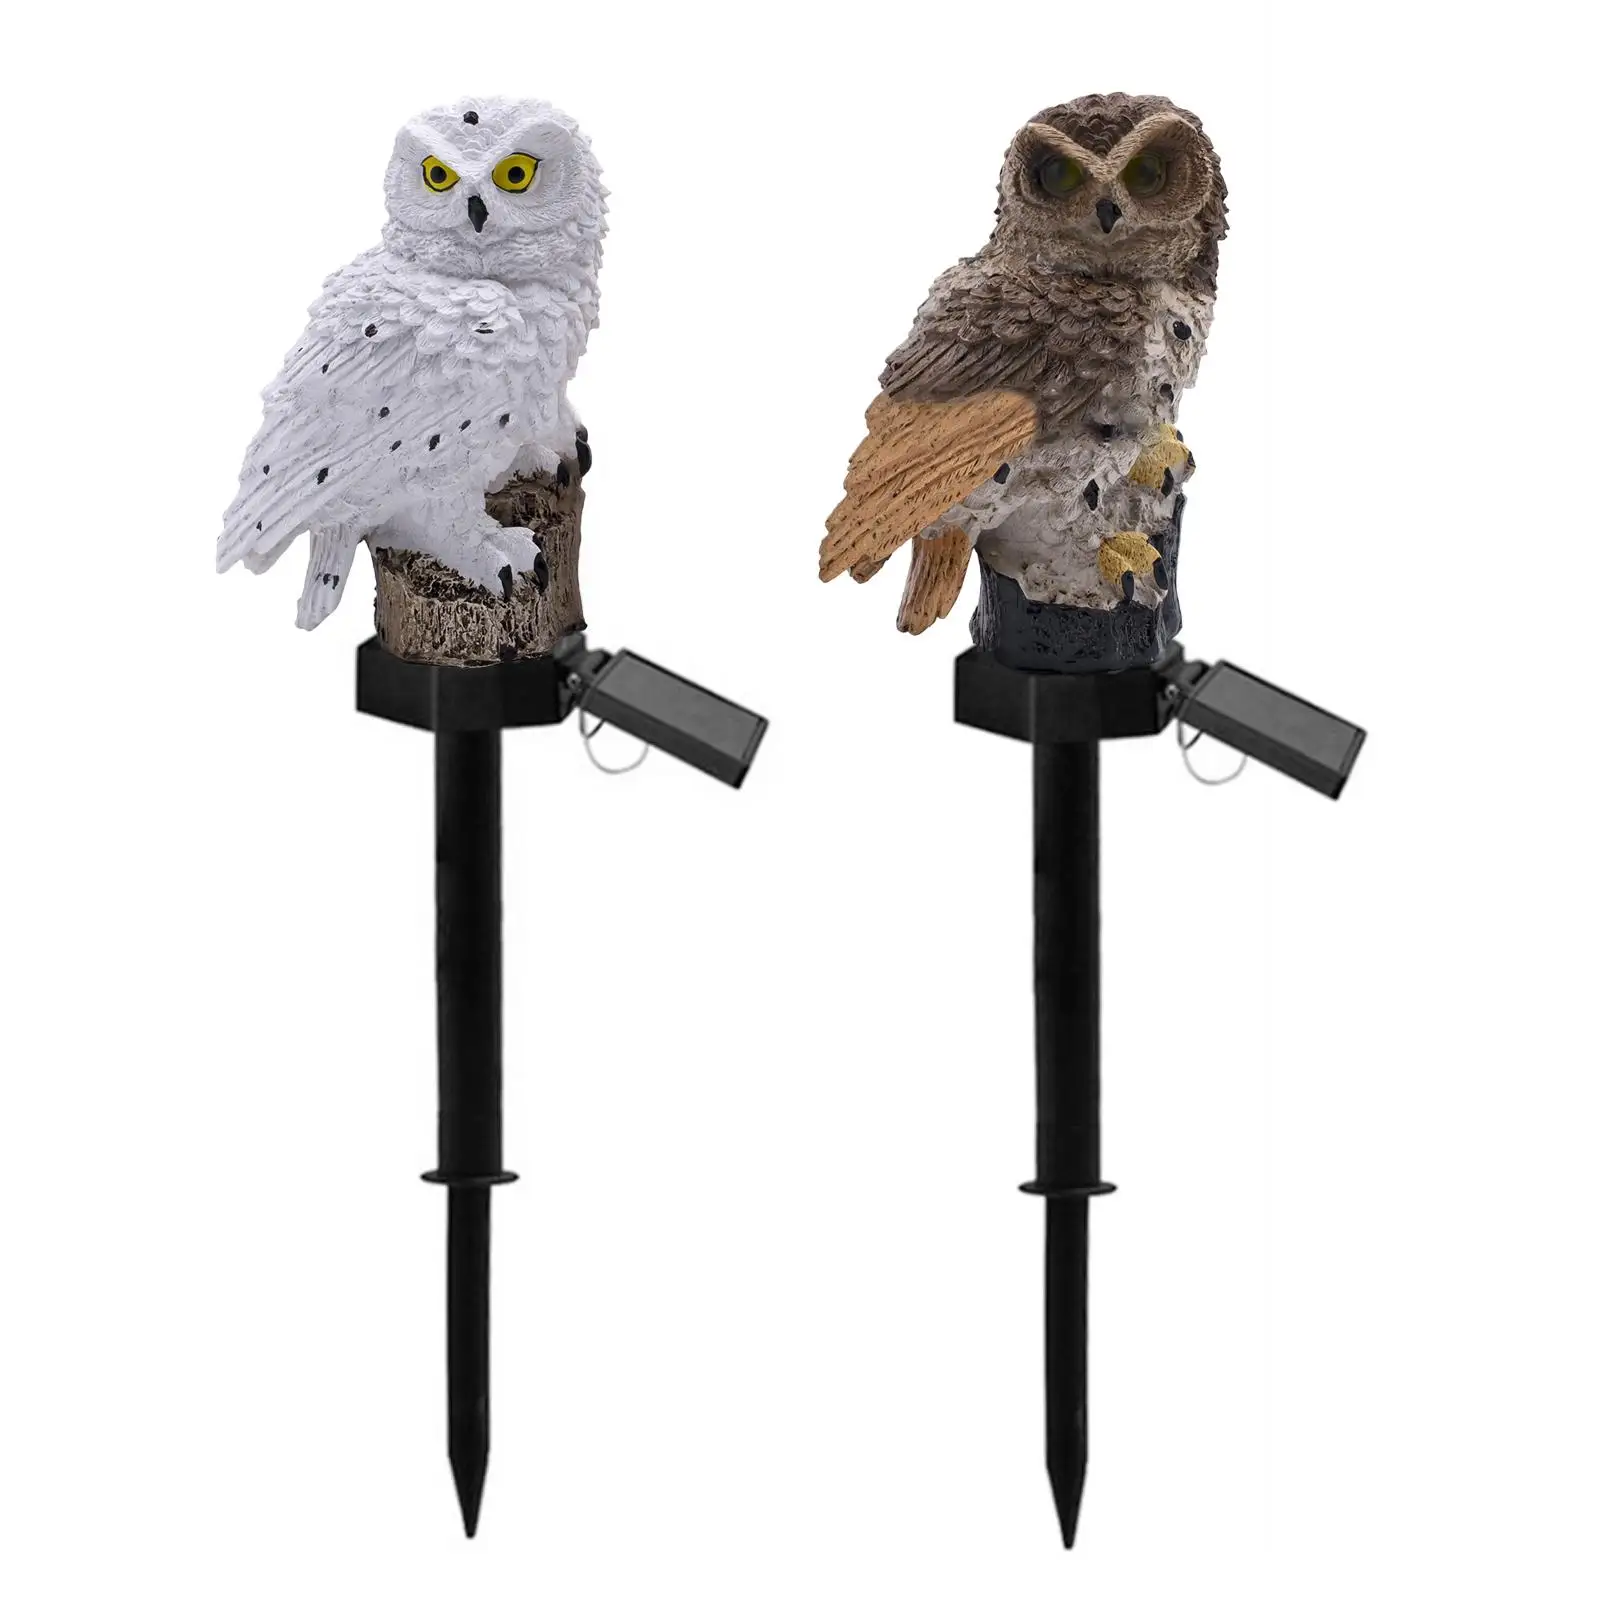 Owl Shape Lawn Light with Stake LED Solar Power Waterproof Scare Birds Away Resin Landscape Lamp for Outdoor Lighting Christmas